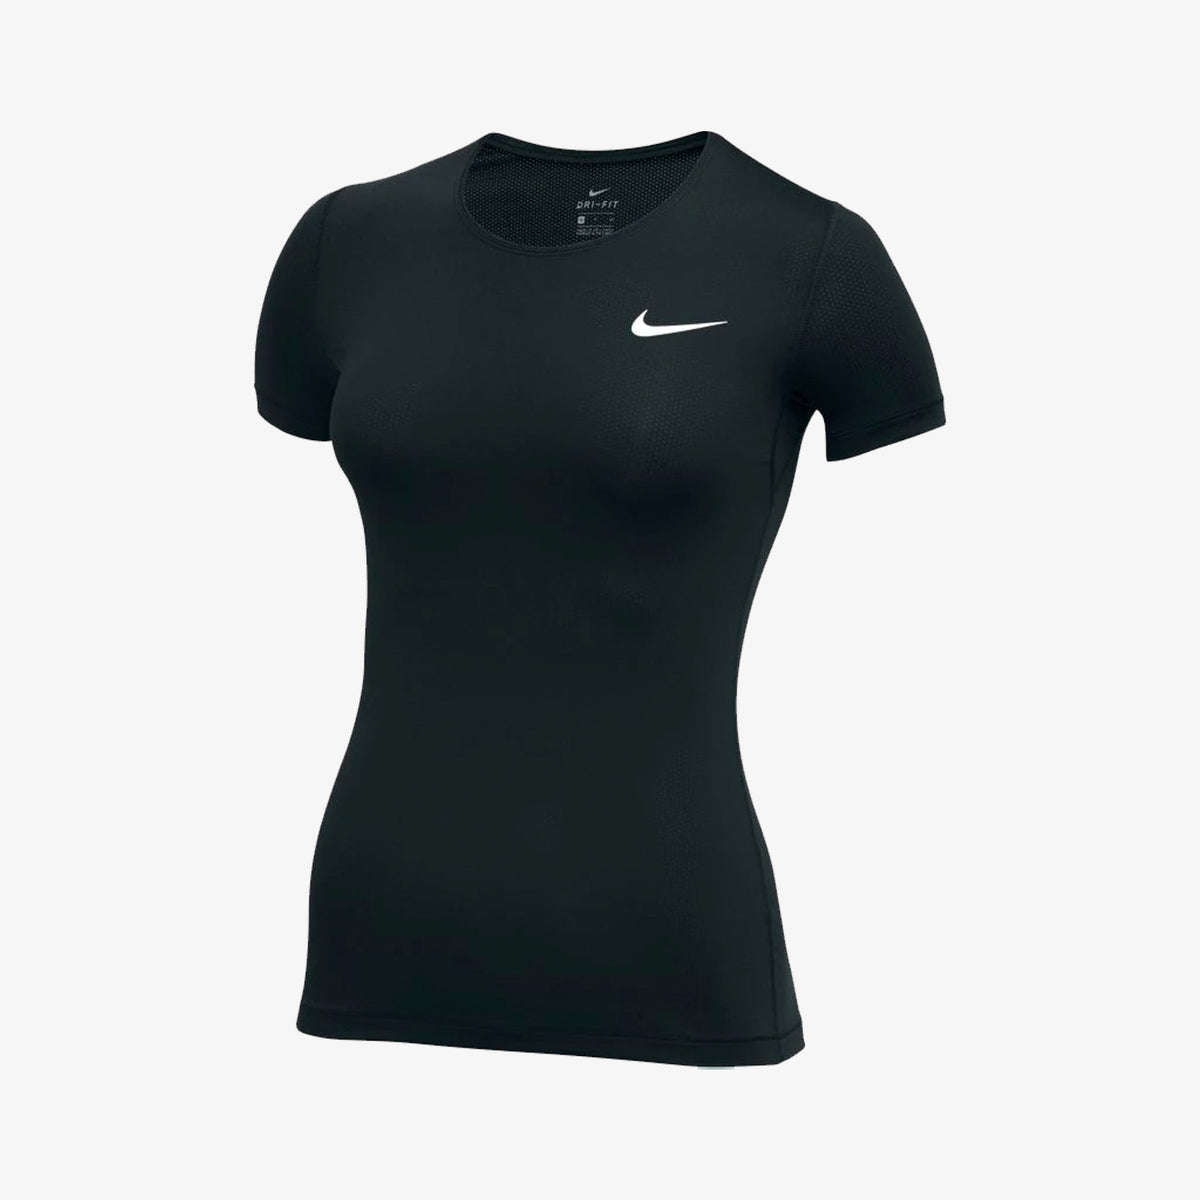 Nike Pro Women's Short-Sleeve Compression Top - Niky's Sports